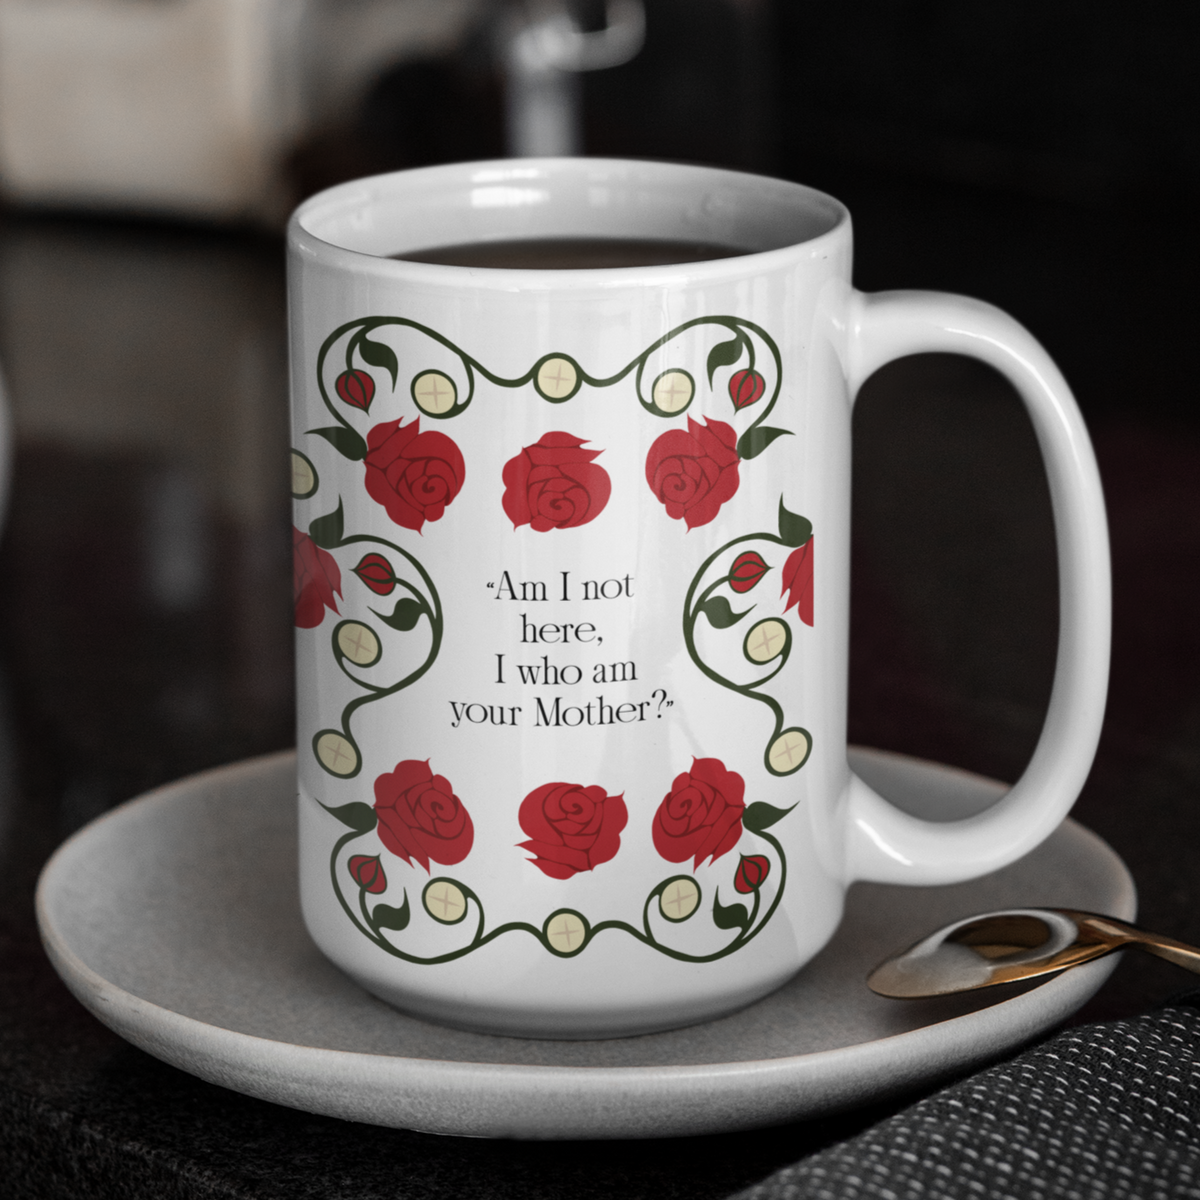 Our Lady of Guadalupe & The Eucharist Mug